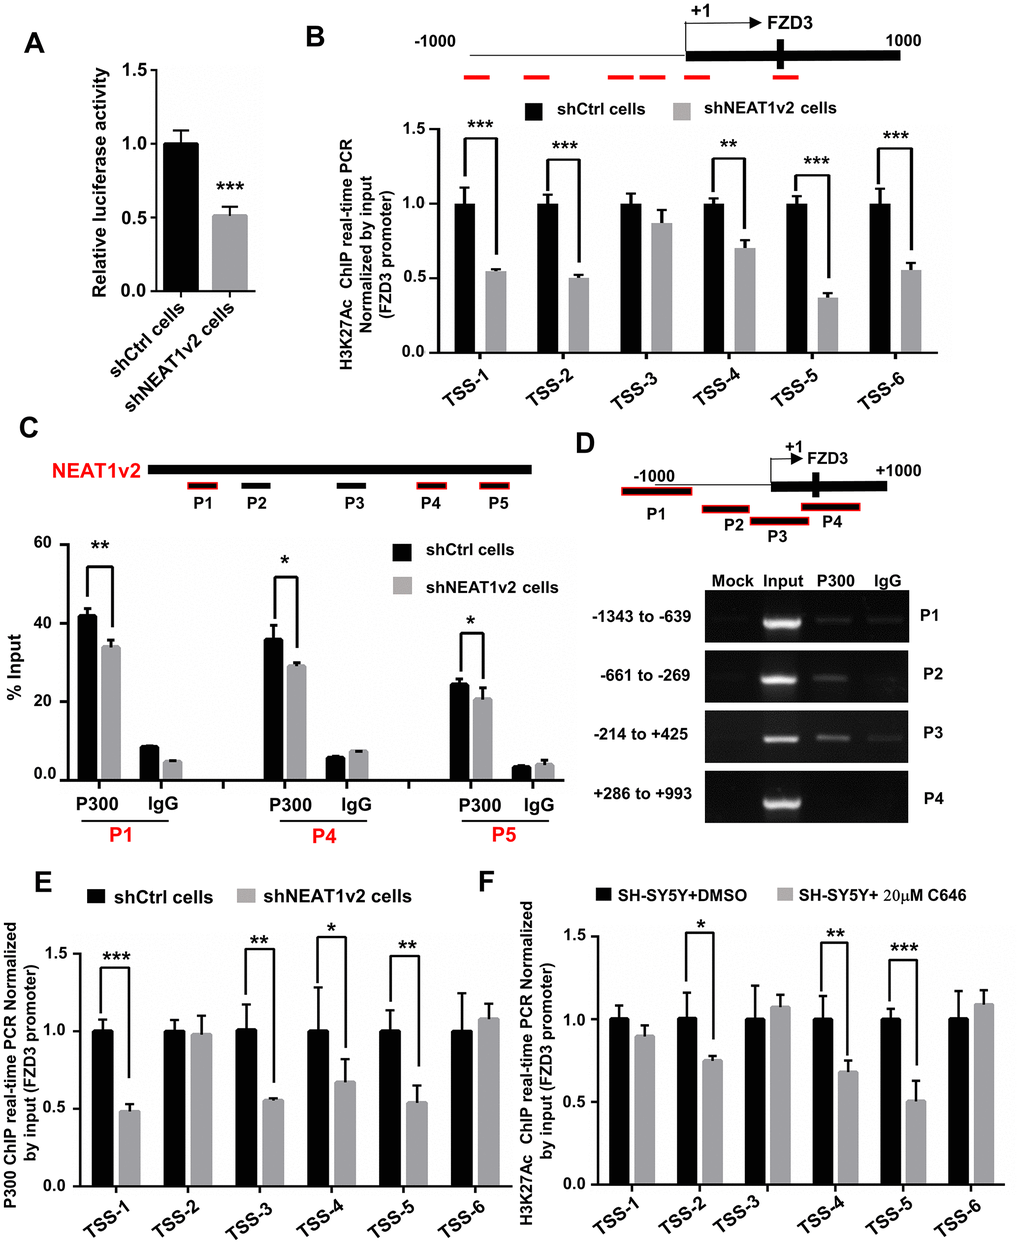 NEAT1 regulates FZD3 expression via recruitment of histone acetyltransferase P300. (A) After co-transfection with NEAT1v2 siRNA or Ctrl siRNA and the pGL3 enhancer plasmid containing FZD3 promoter fragments, the relative transcriptional activities were determined with a luciferase assay in three independent experiments. (B) The shNEAT1v2 cells and shCtrl cells were collected for ChIP assays to analyze the relative fold enrichment of the FZD3 promoter using anti-H3K27Ac antibody (n=3). (C) Schematic of potential P300 binding sites in the NEAT1 sequence. The shNEAT1v2 cells and shCtrl cells lysates were harvested and subjected to a RIP assay. QRT-PCR was performed to detect the retrieval of NEAT1 and ACTB by the anti-P300 and anti-IgG antibodies over the input level (n=3). (D) ChIP-PCR analysis was performed to detect the potential P300 binding sites in the FZD3 promoter after using SH-SY5Y cells lysates (n=3). (E) The shNEAT1v2 cells and shCtrl cells were collected for ChIP assays to analyze the relative fold enrichment of the FZD3 promoter using anti-P300 antibody (n=3). (F) The 20μM C646 treated and vehicle treated SH-SY5Y cells were collected for ChIP assays to analyze H3K27Ac enrichment level of the FZD3 promoter (n=3) (mean ± s.d, *P P t test).